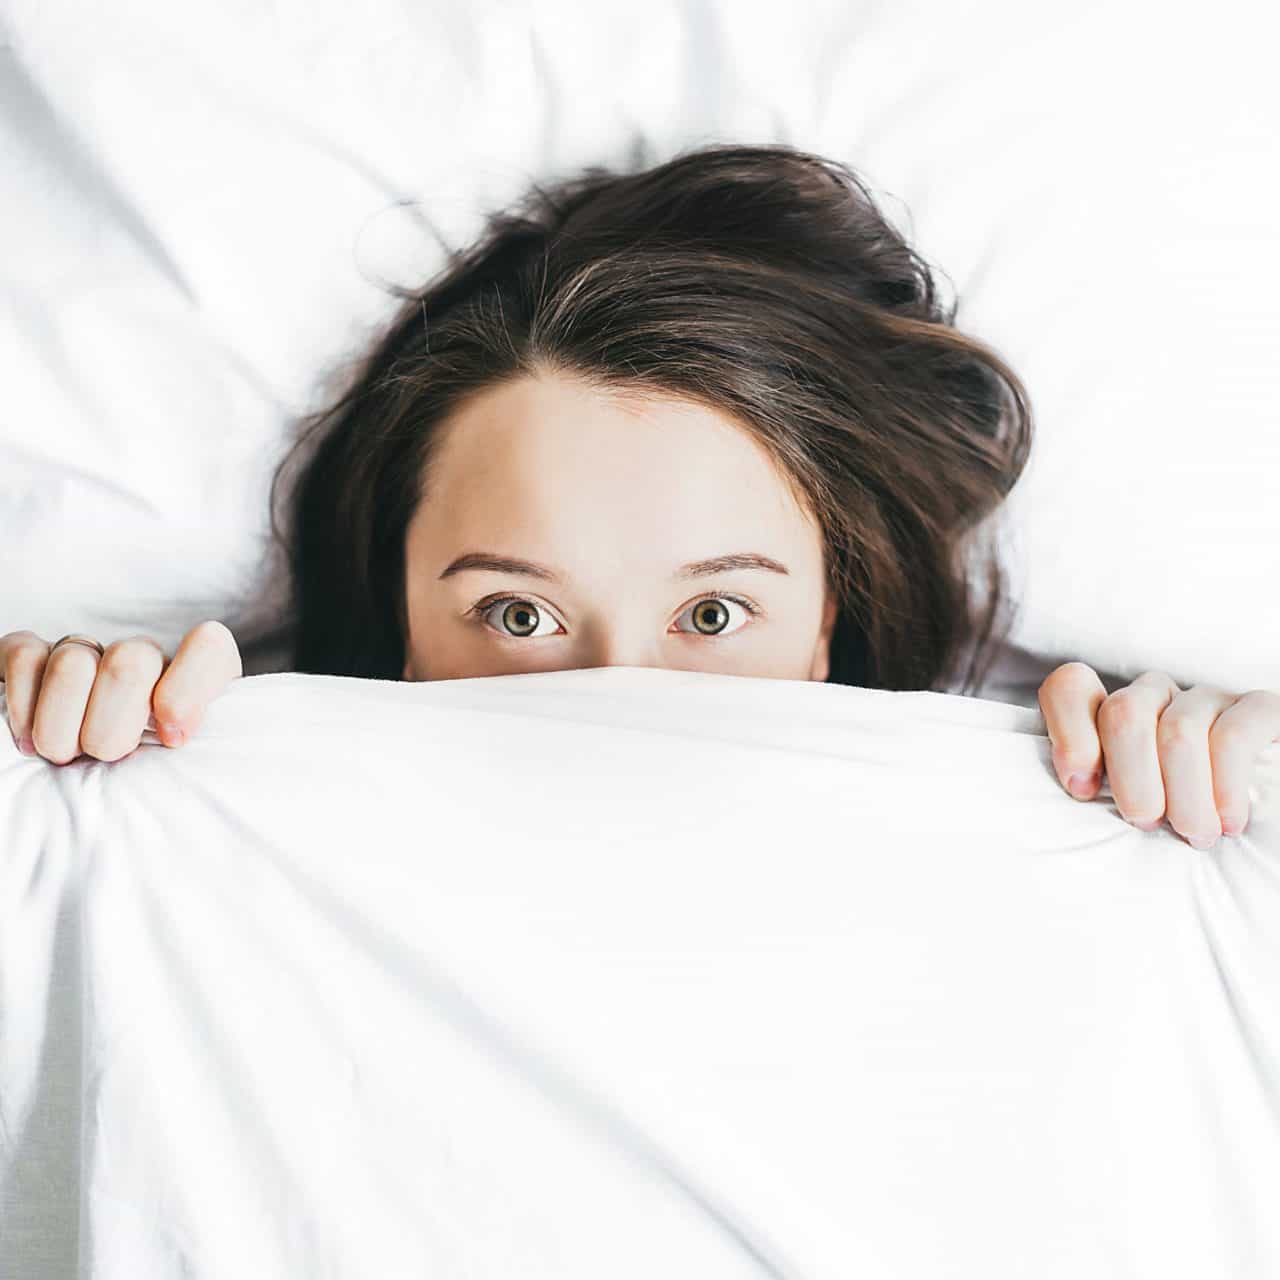 Woman awake in bed with blanket over her mouth and nose